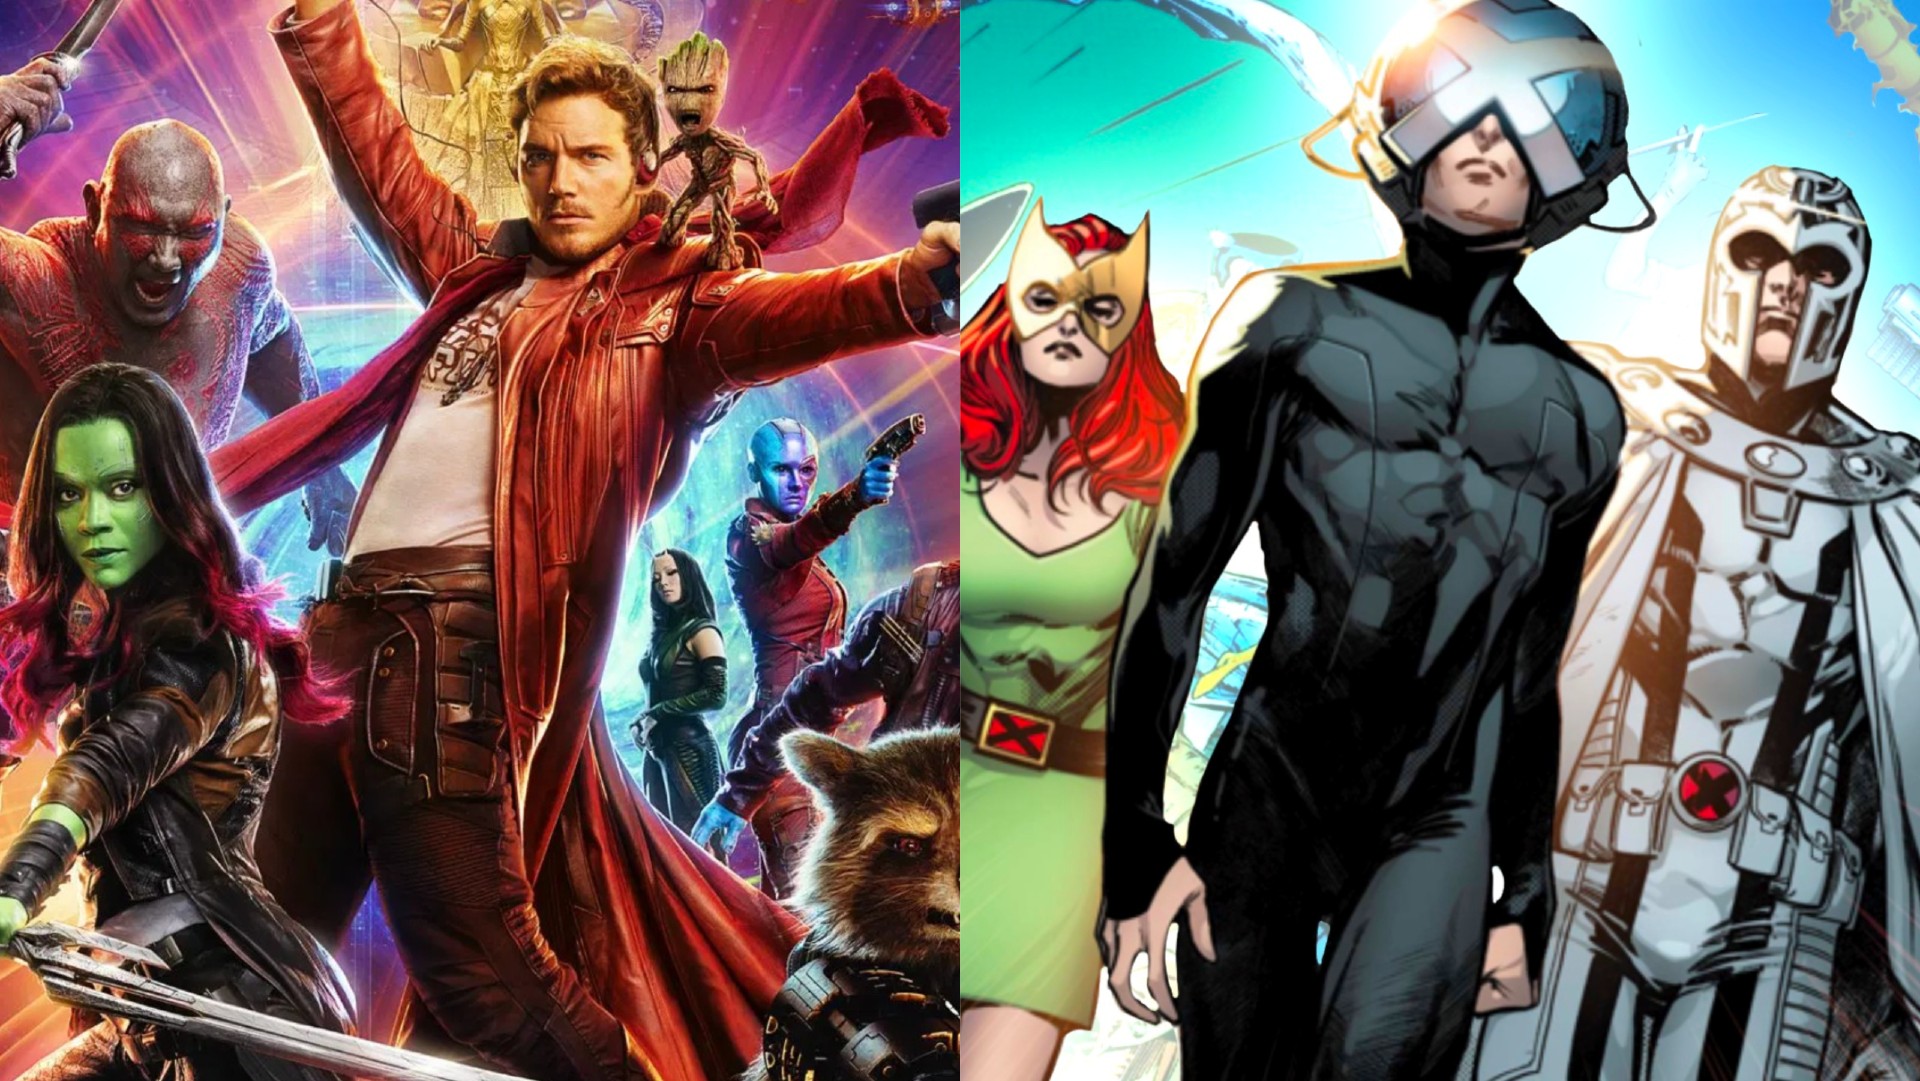 A massive 'Avengers 5' crossover movie with X-Men is already in